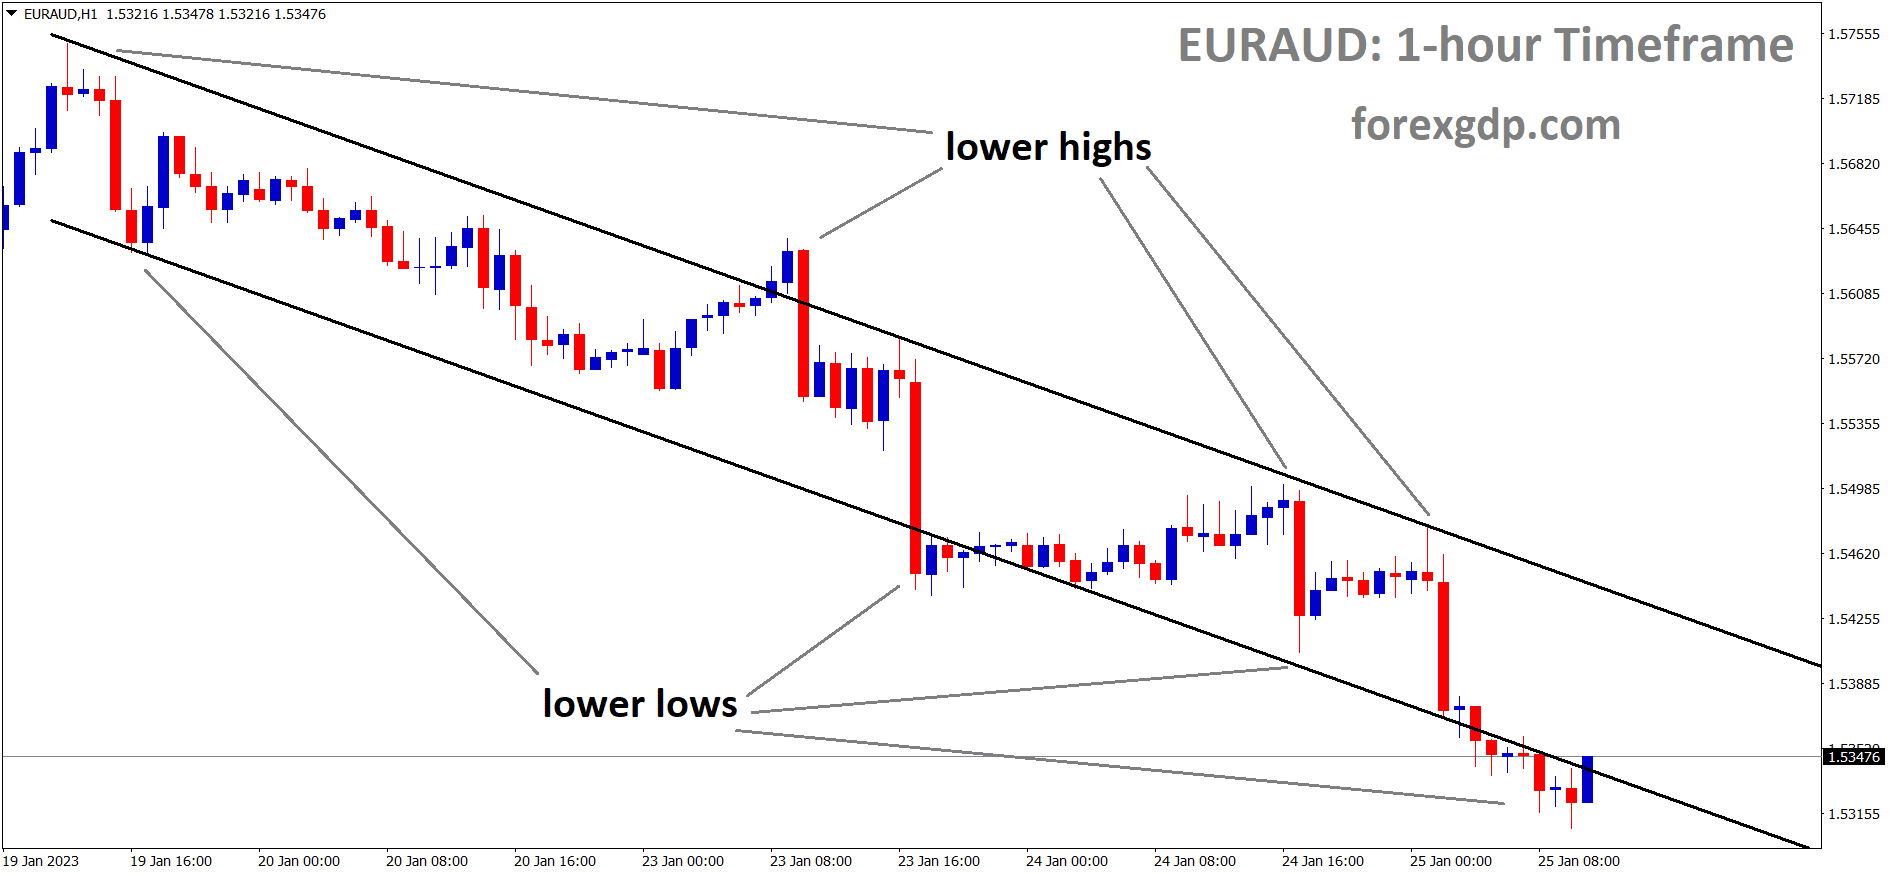 EURCHF is moving in a Descending channel and the market has reached the lower low area of the channel.